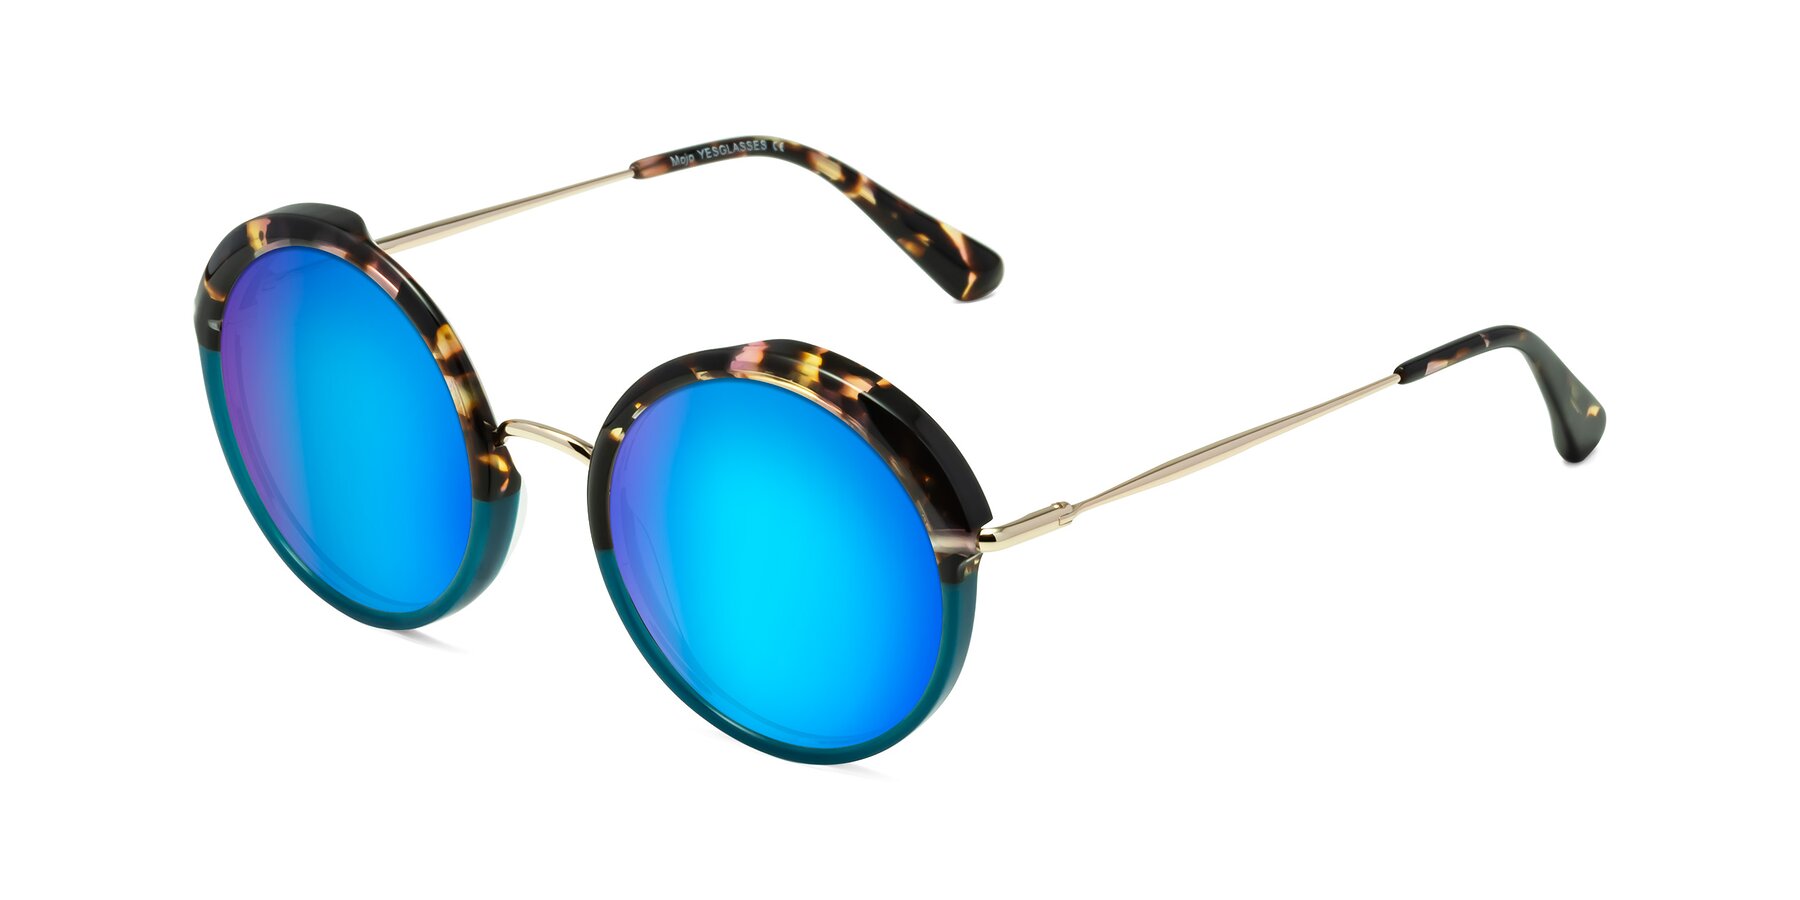 Angle of Mojo in Floral-Teal with Blue Mirrored Lenses